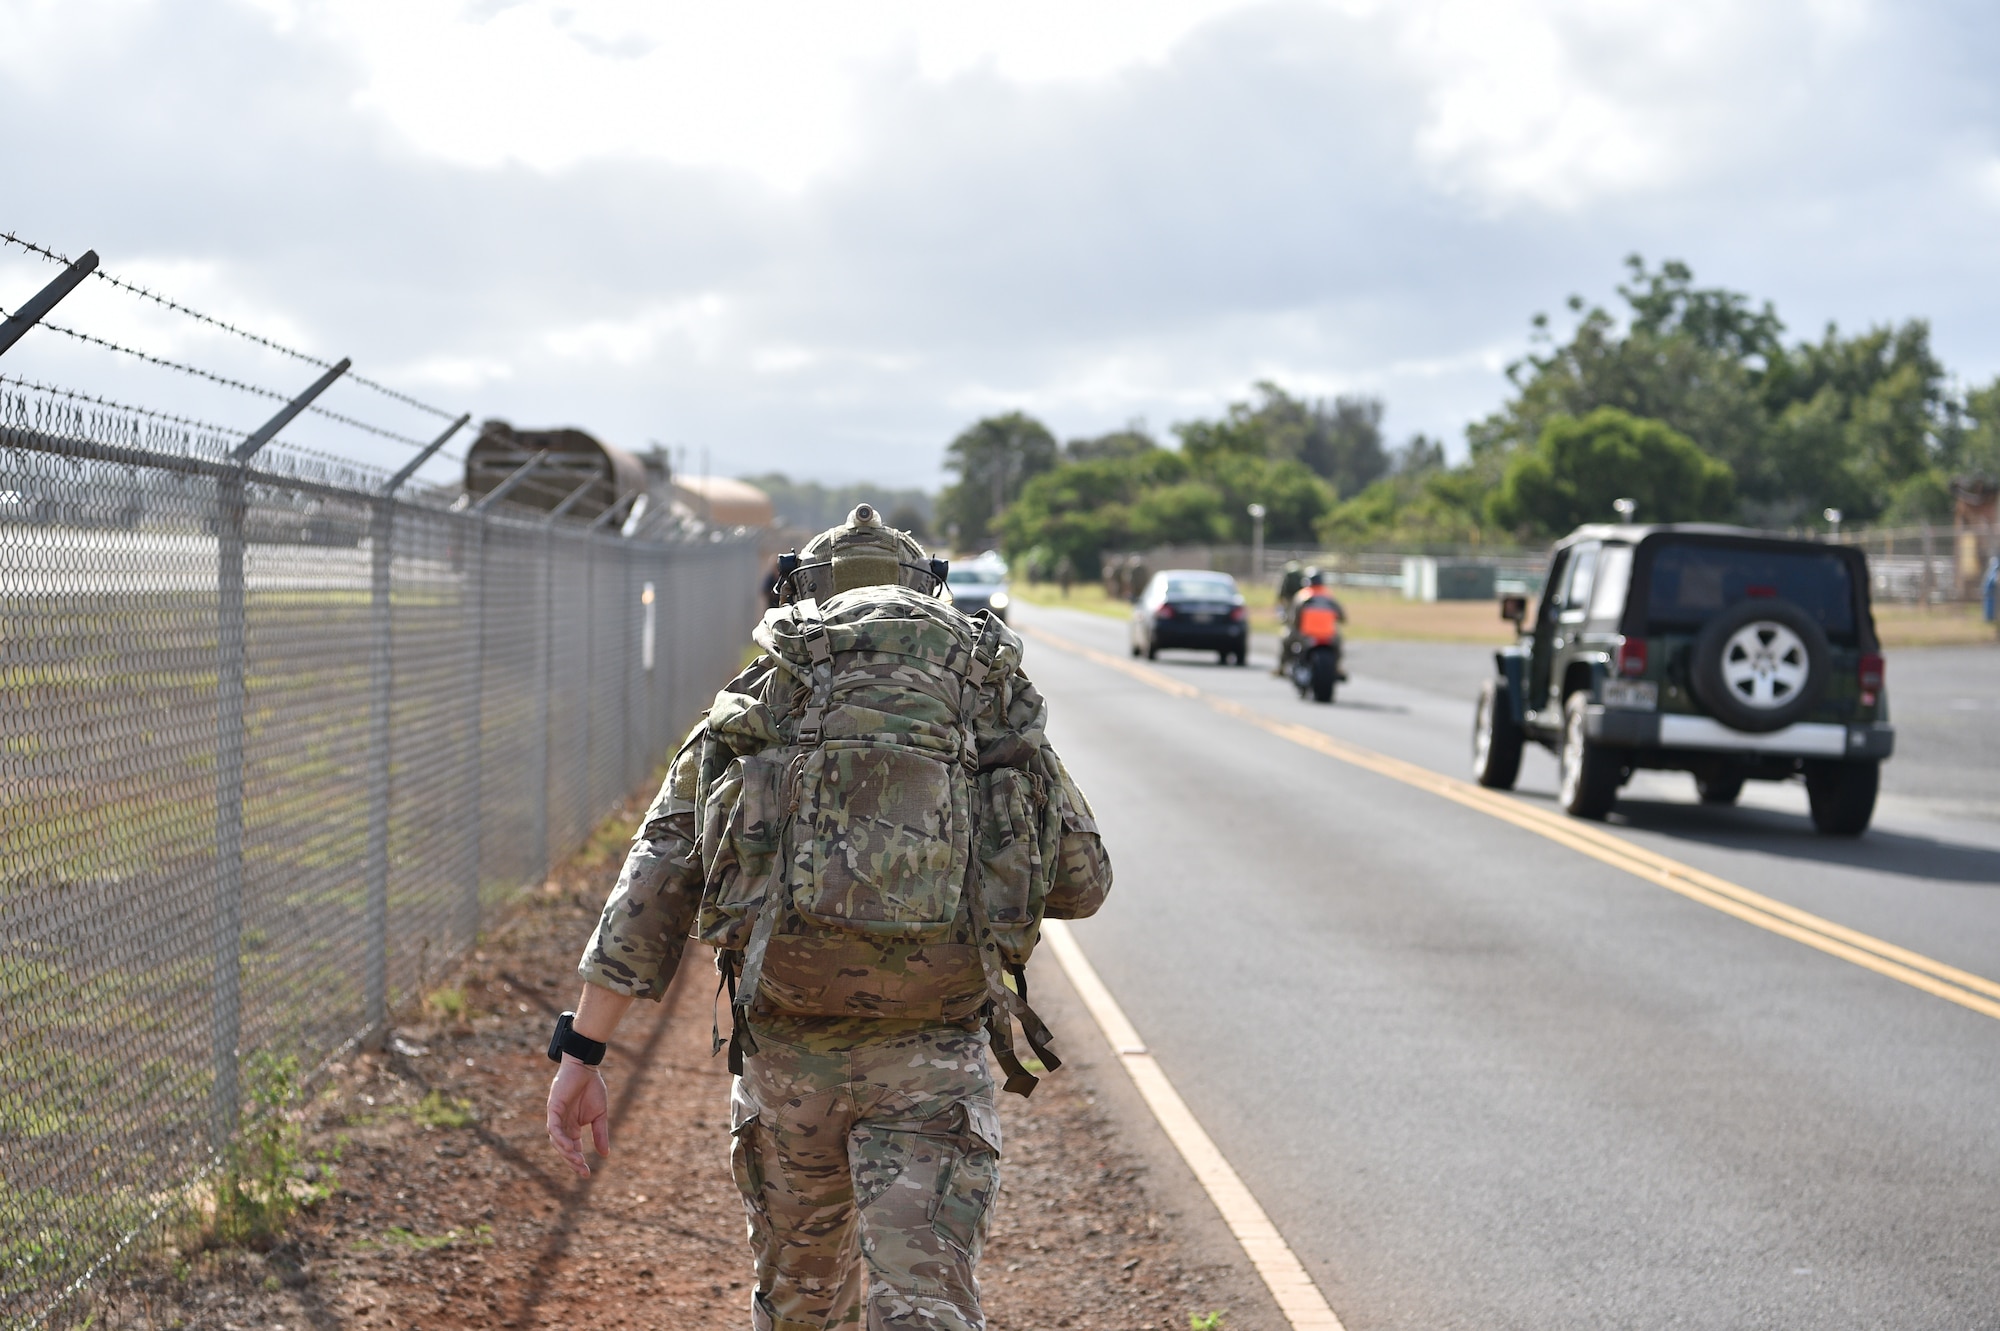 Airmen from the 25th Air Support Operations Squadron perform a three-mile ruck in full gear while stopping at different stations to learn about EvolutionONE, a GPS communication system at Joint Base Pearl Harbor-Hickam, Hawaii, August 5, 2020. This training served as a mid-year assessment of the unit’s innovation tactics. (U.S. Air Force photo by 2nd Lt. Benjamin Aronson)